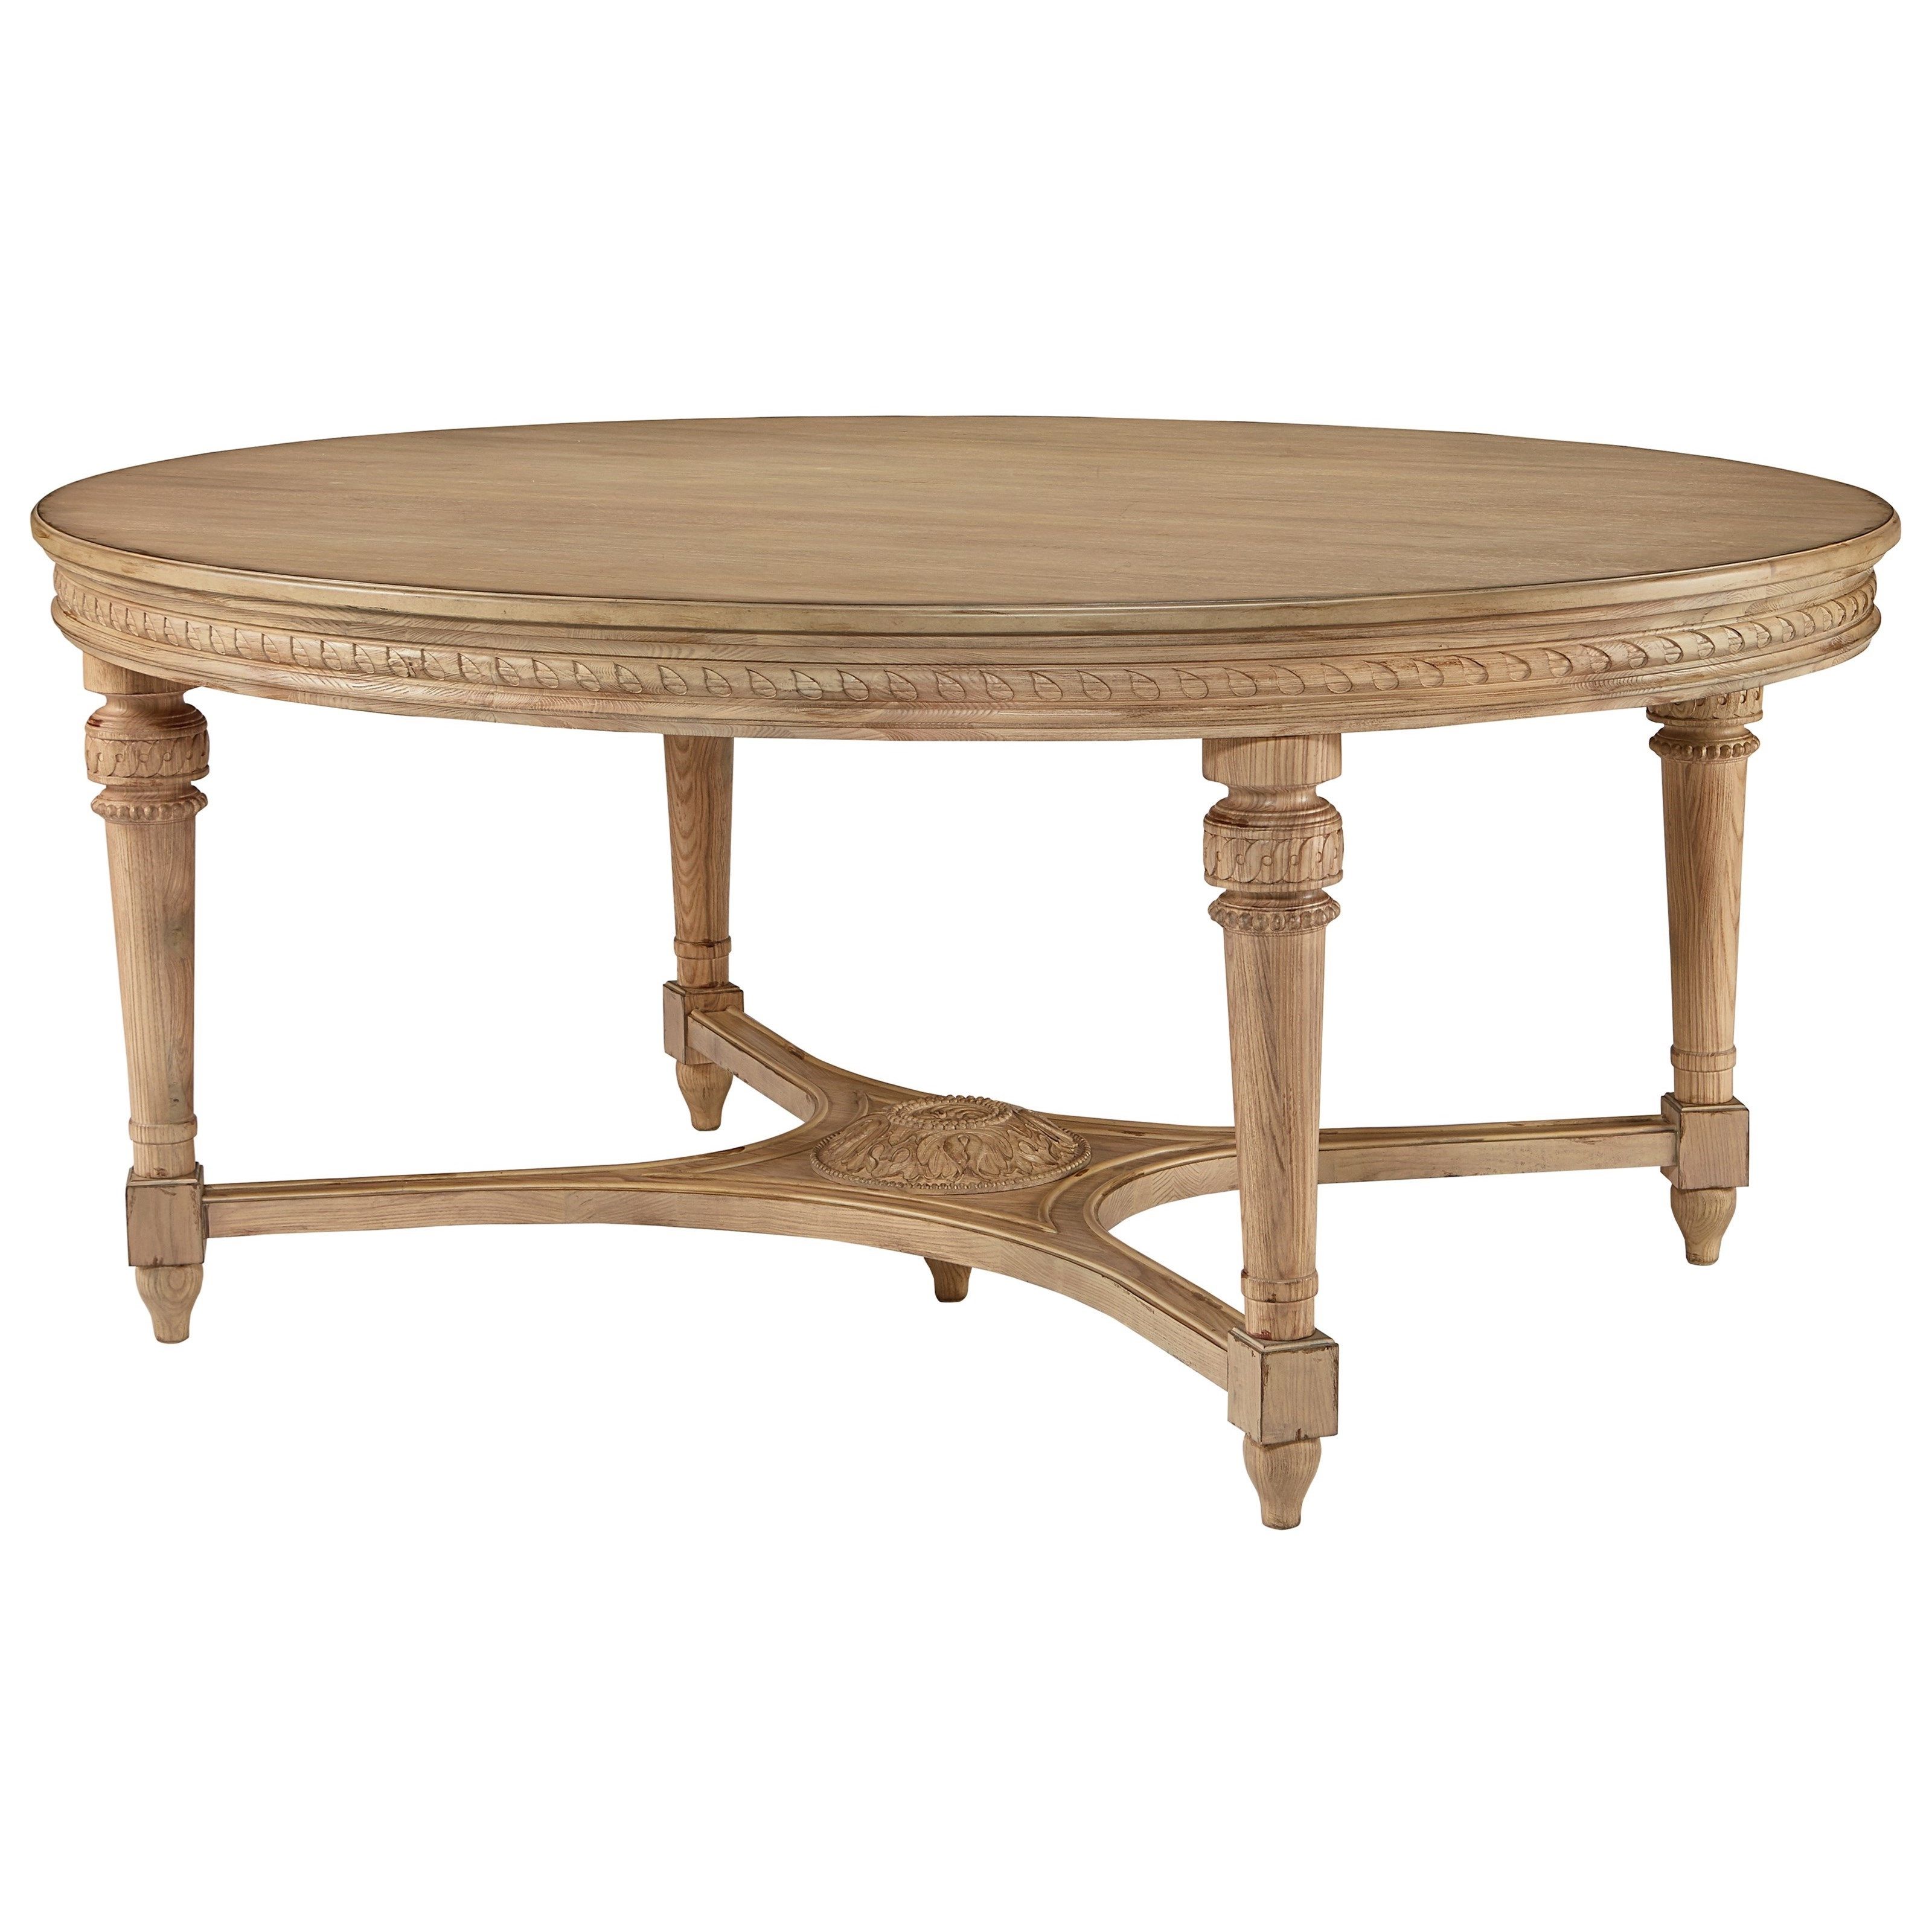 Most Recently Released Magnolia Home Ellipse Cocktail Tables By Joanna Gaines Pertaining To Oval Antique Dining Table With Wheat Finishmagnolia Home (Gallery 3 of 20)